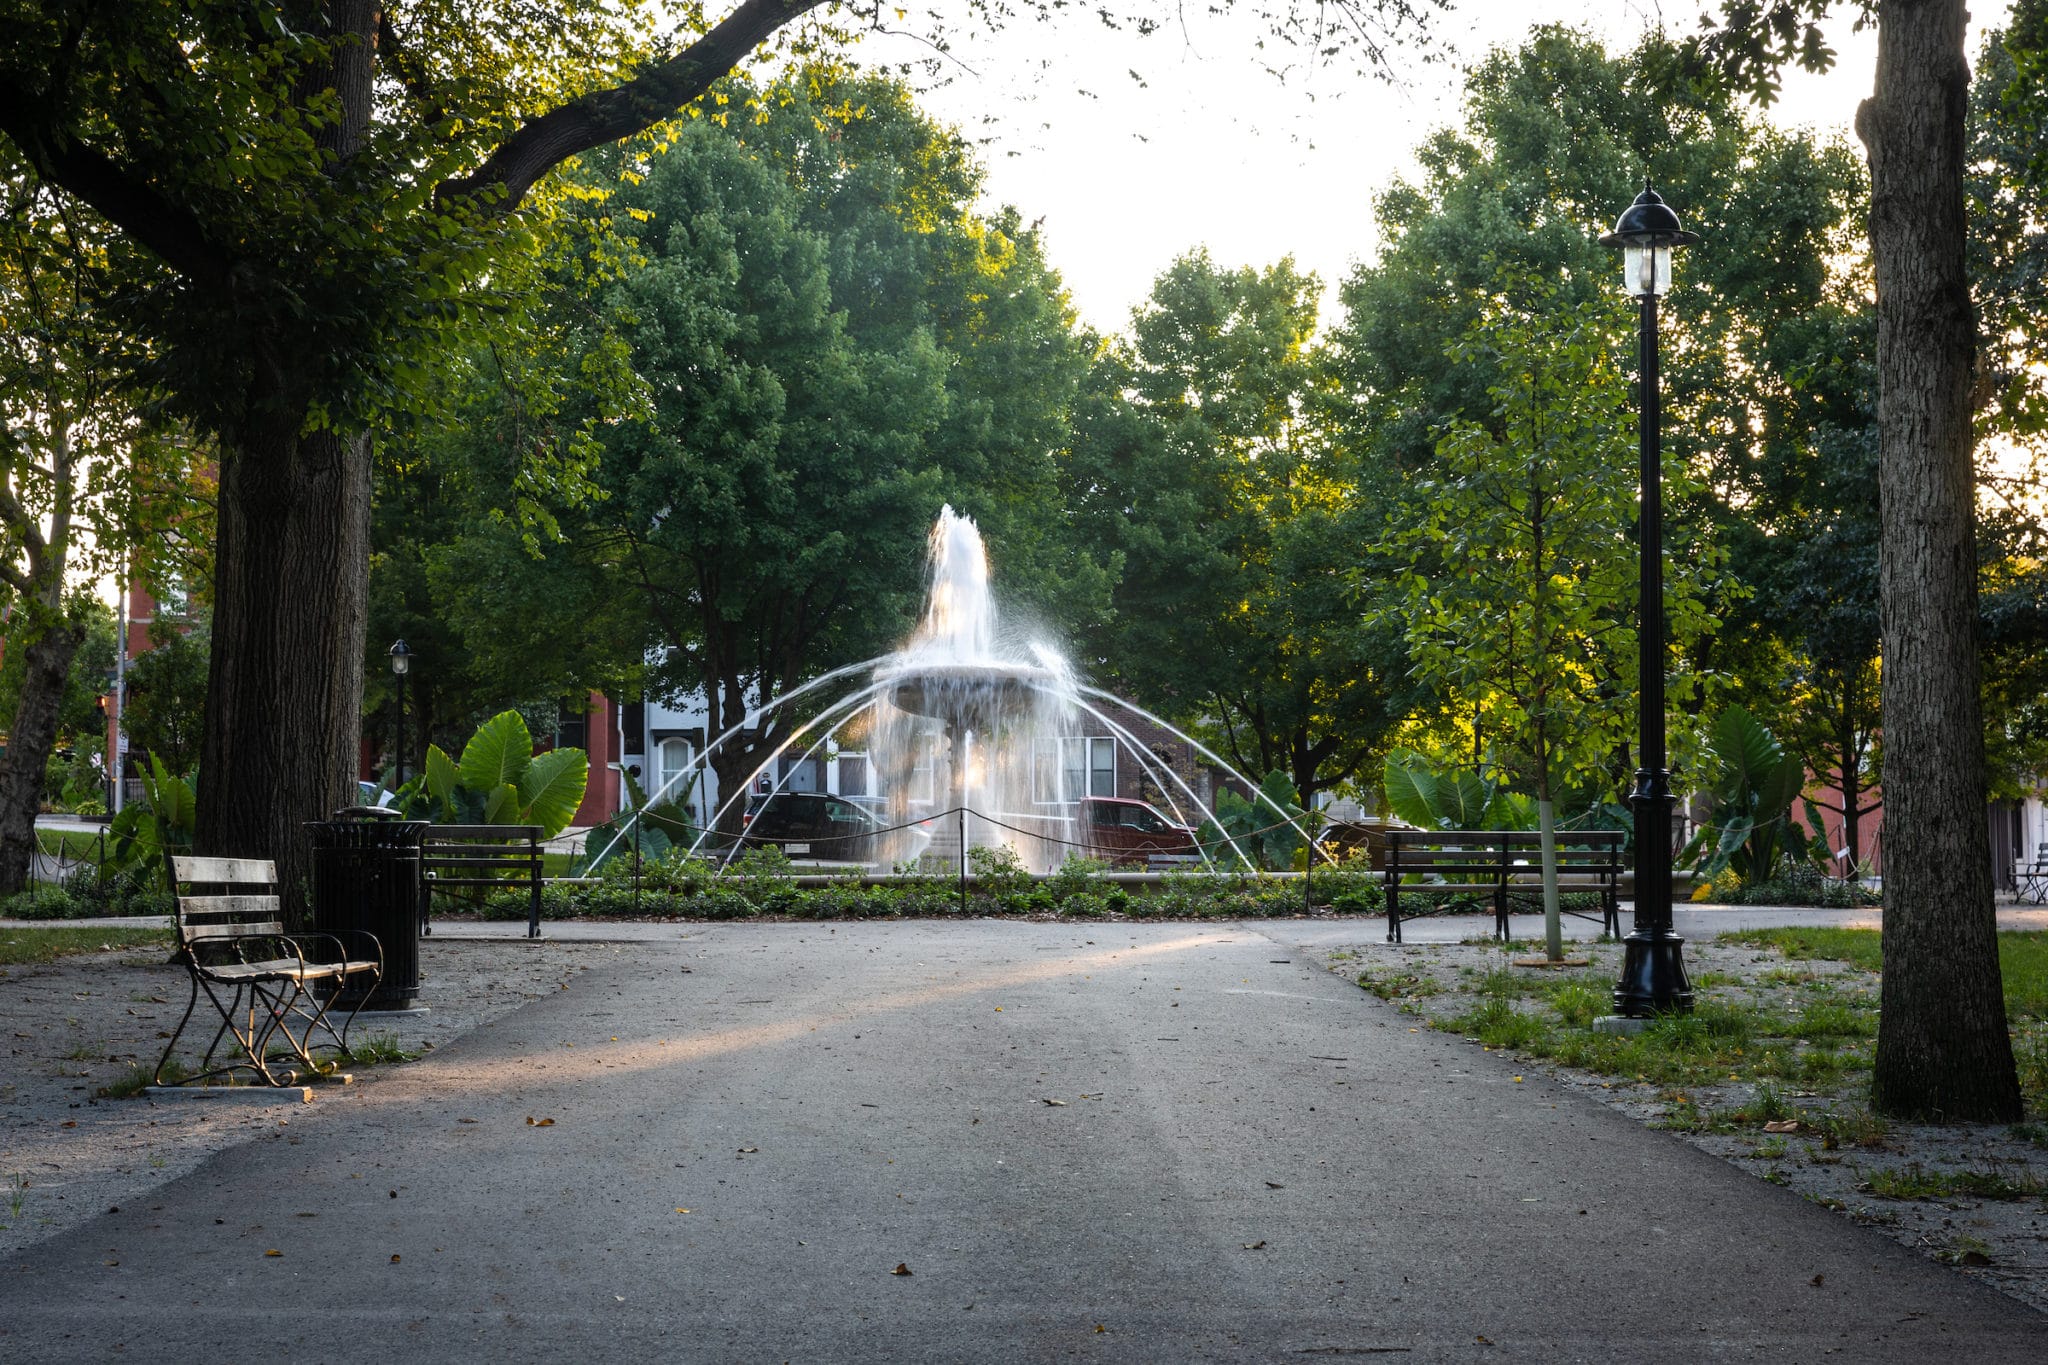 An image of the fountain at Allegheny Commons.